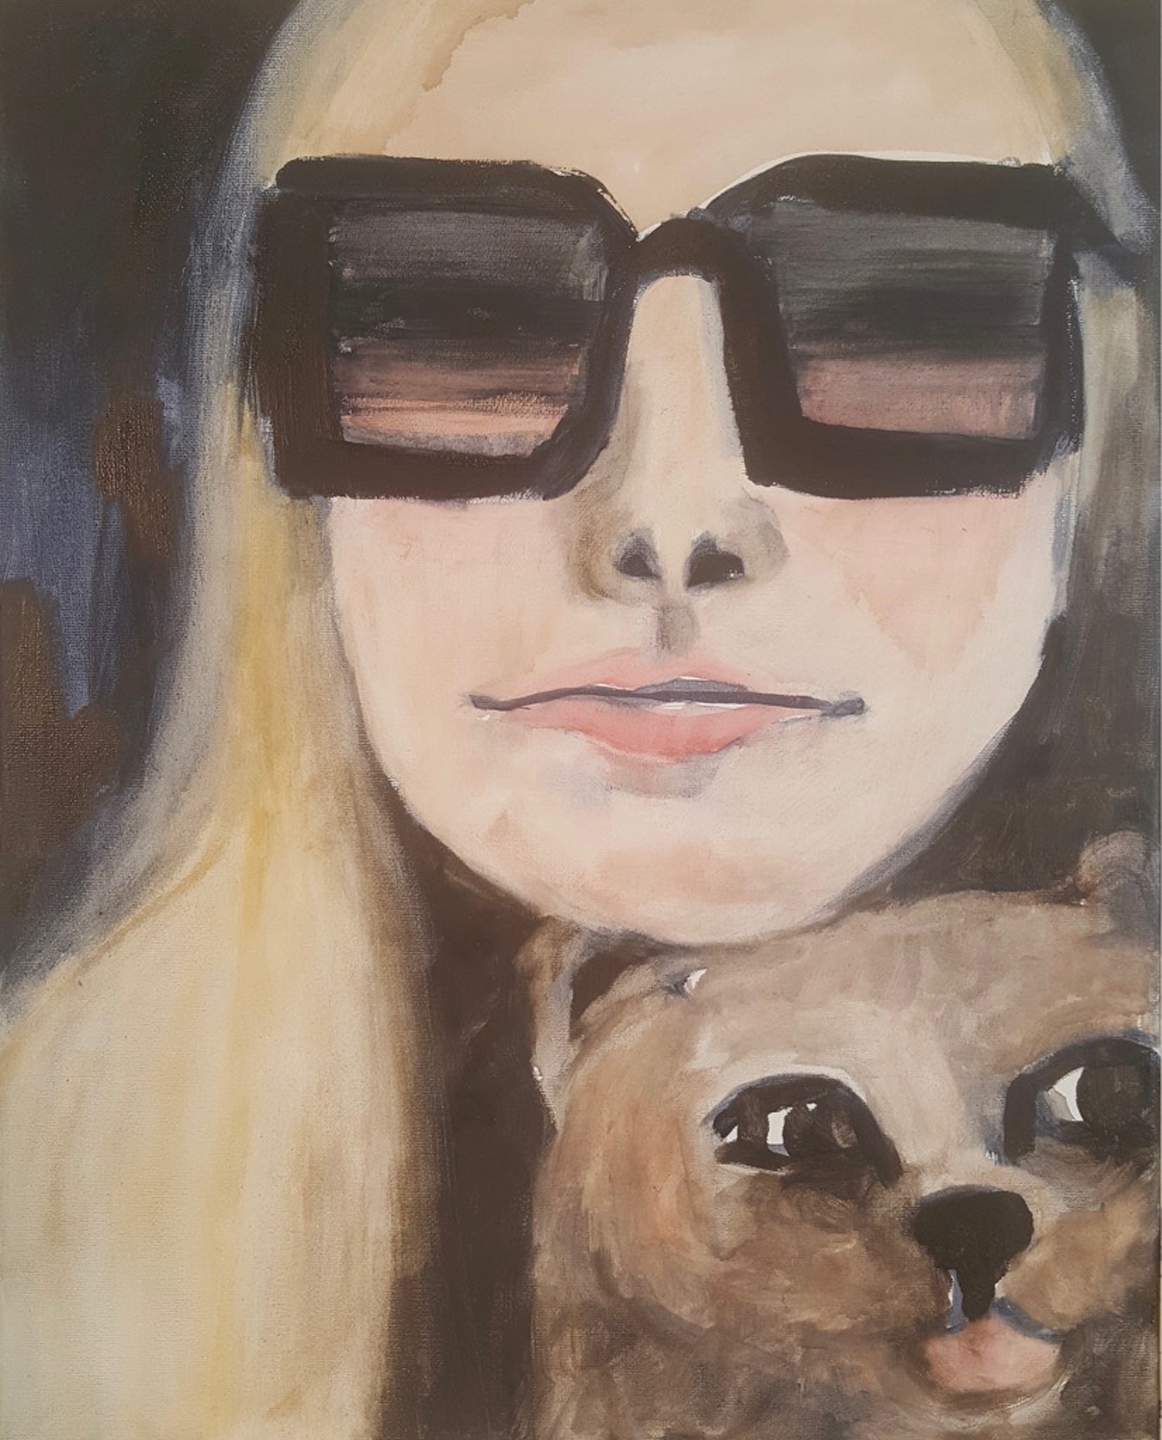 Ms Sunglasses and her brown dog